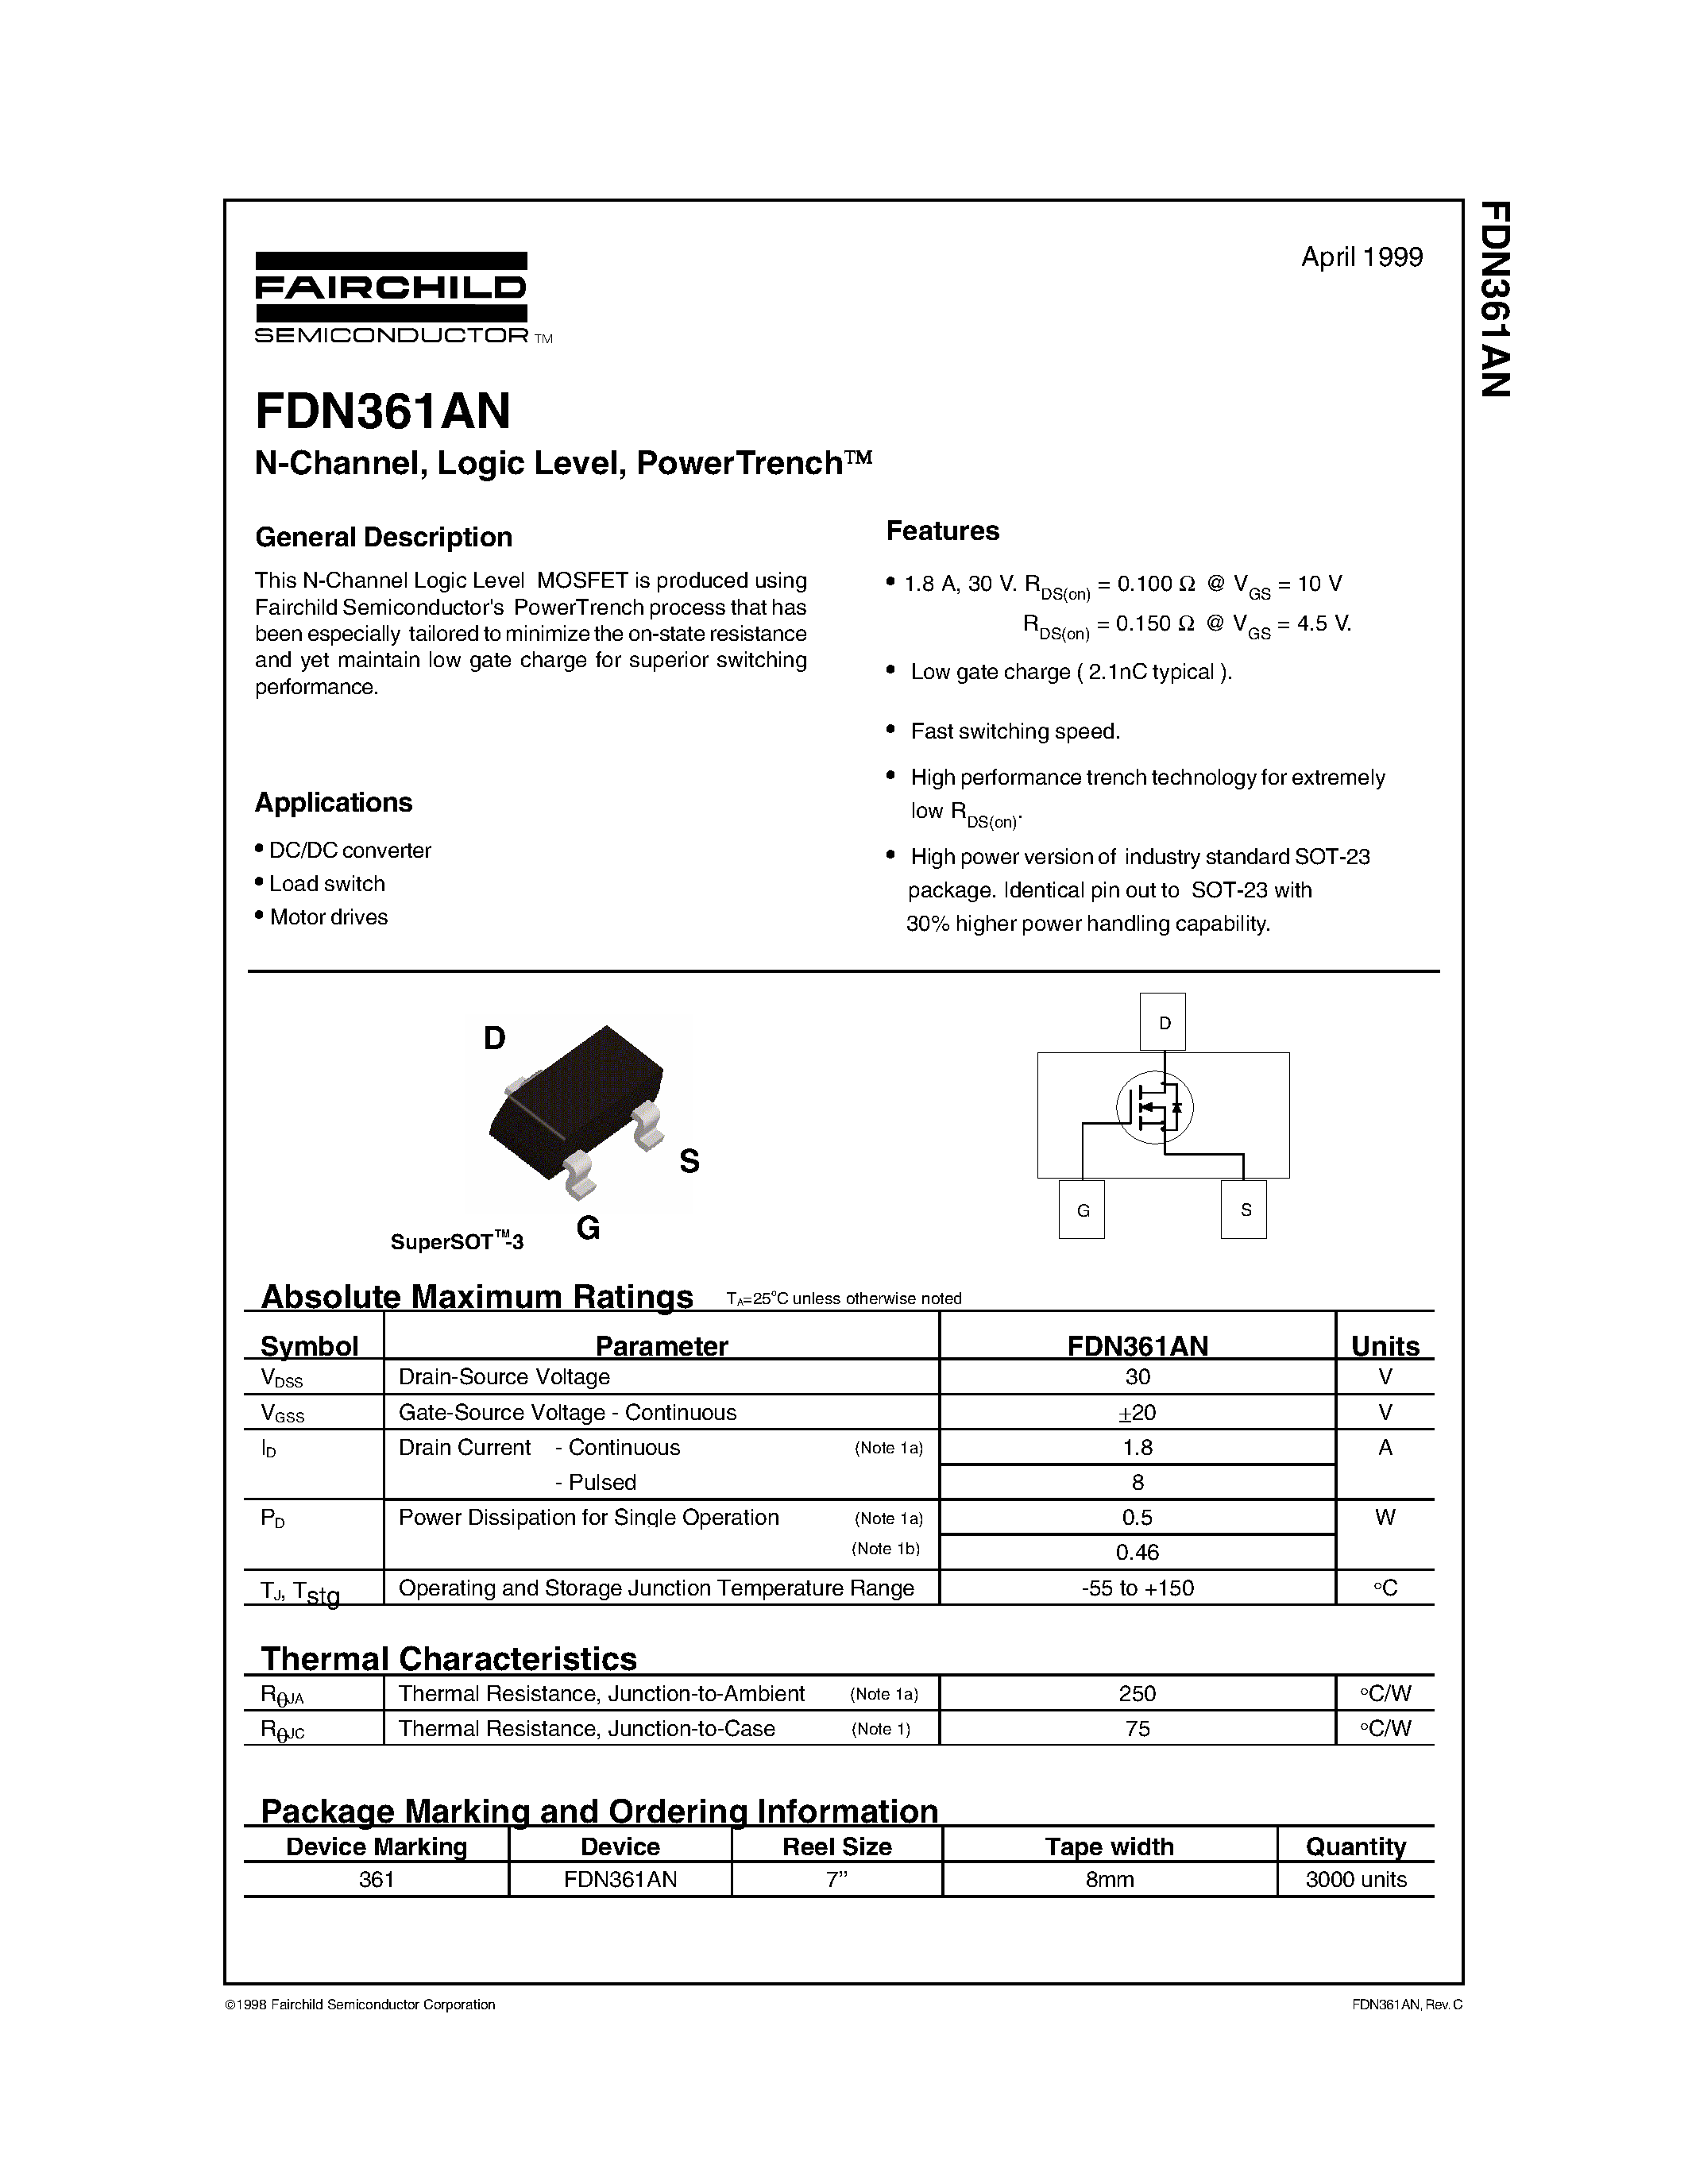 Datasheet FDN361AN - N-Channel/ Logic Level/ PowerTrench page 1